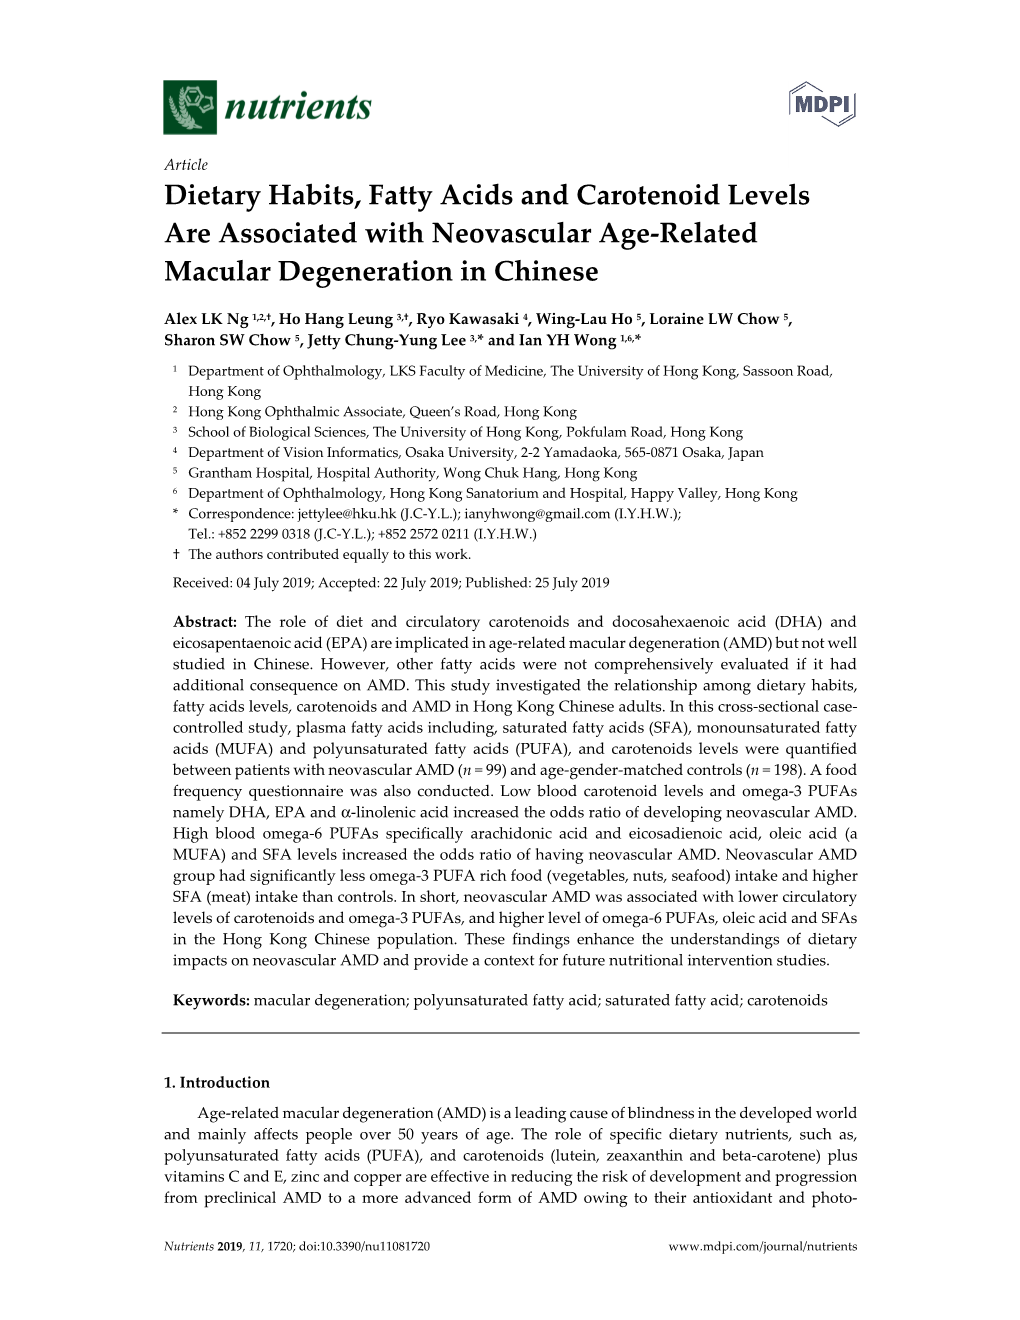 Dietary Habits, Fatty Acids and Carotenoid Levels Are Associated with Neovascular Age-Related Macular Degeneration in Chinese